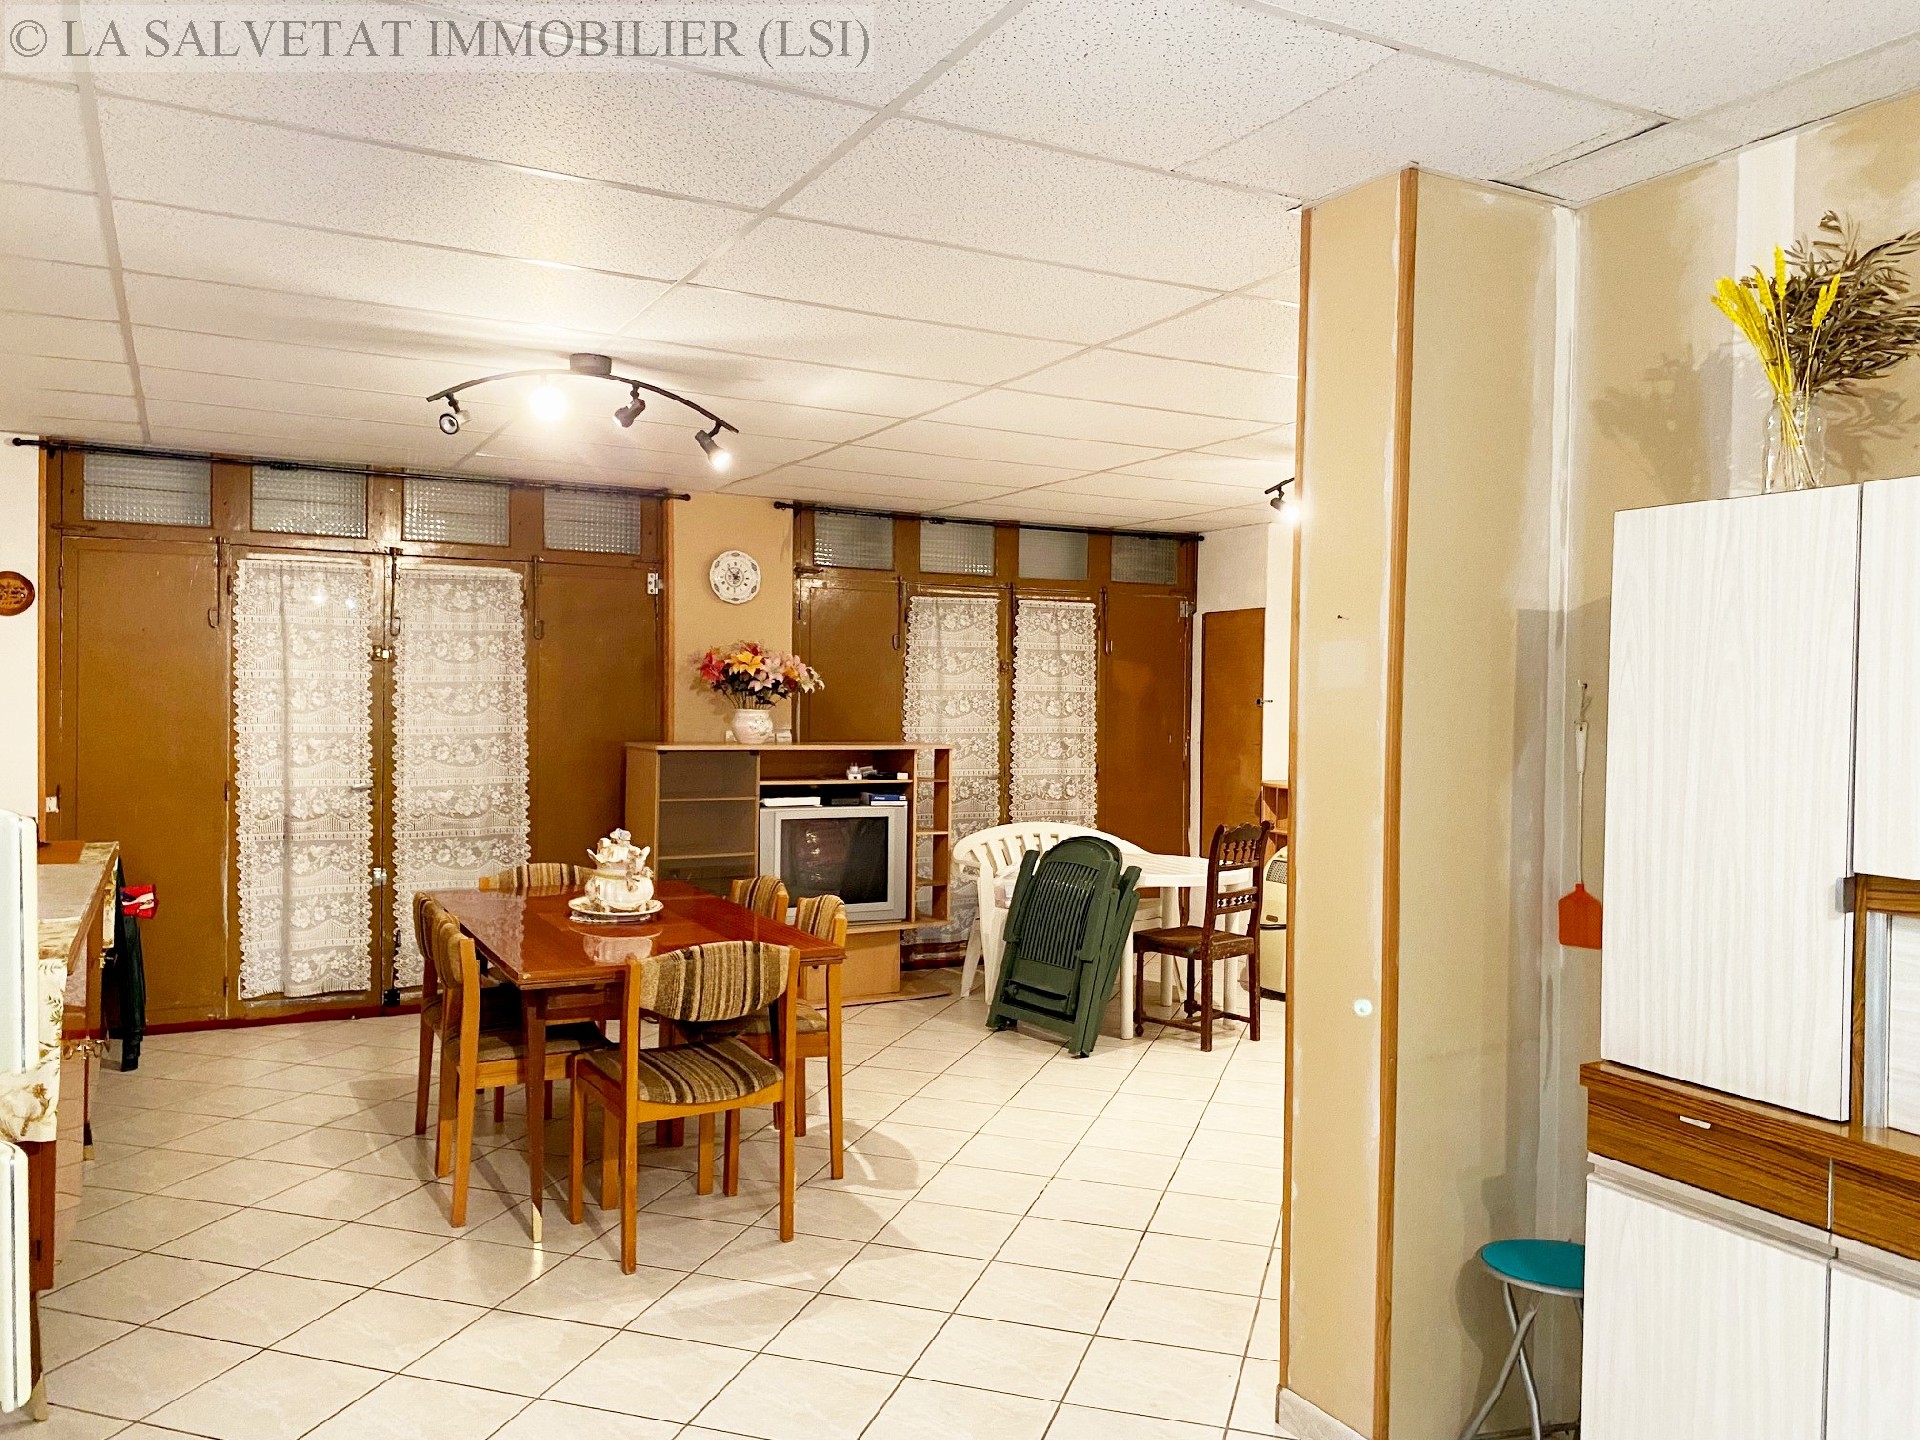 Vente local-magasin - FONSORBES<br>250 m², 6 pièces